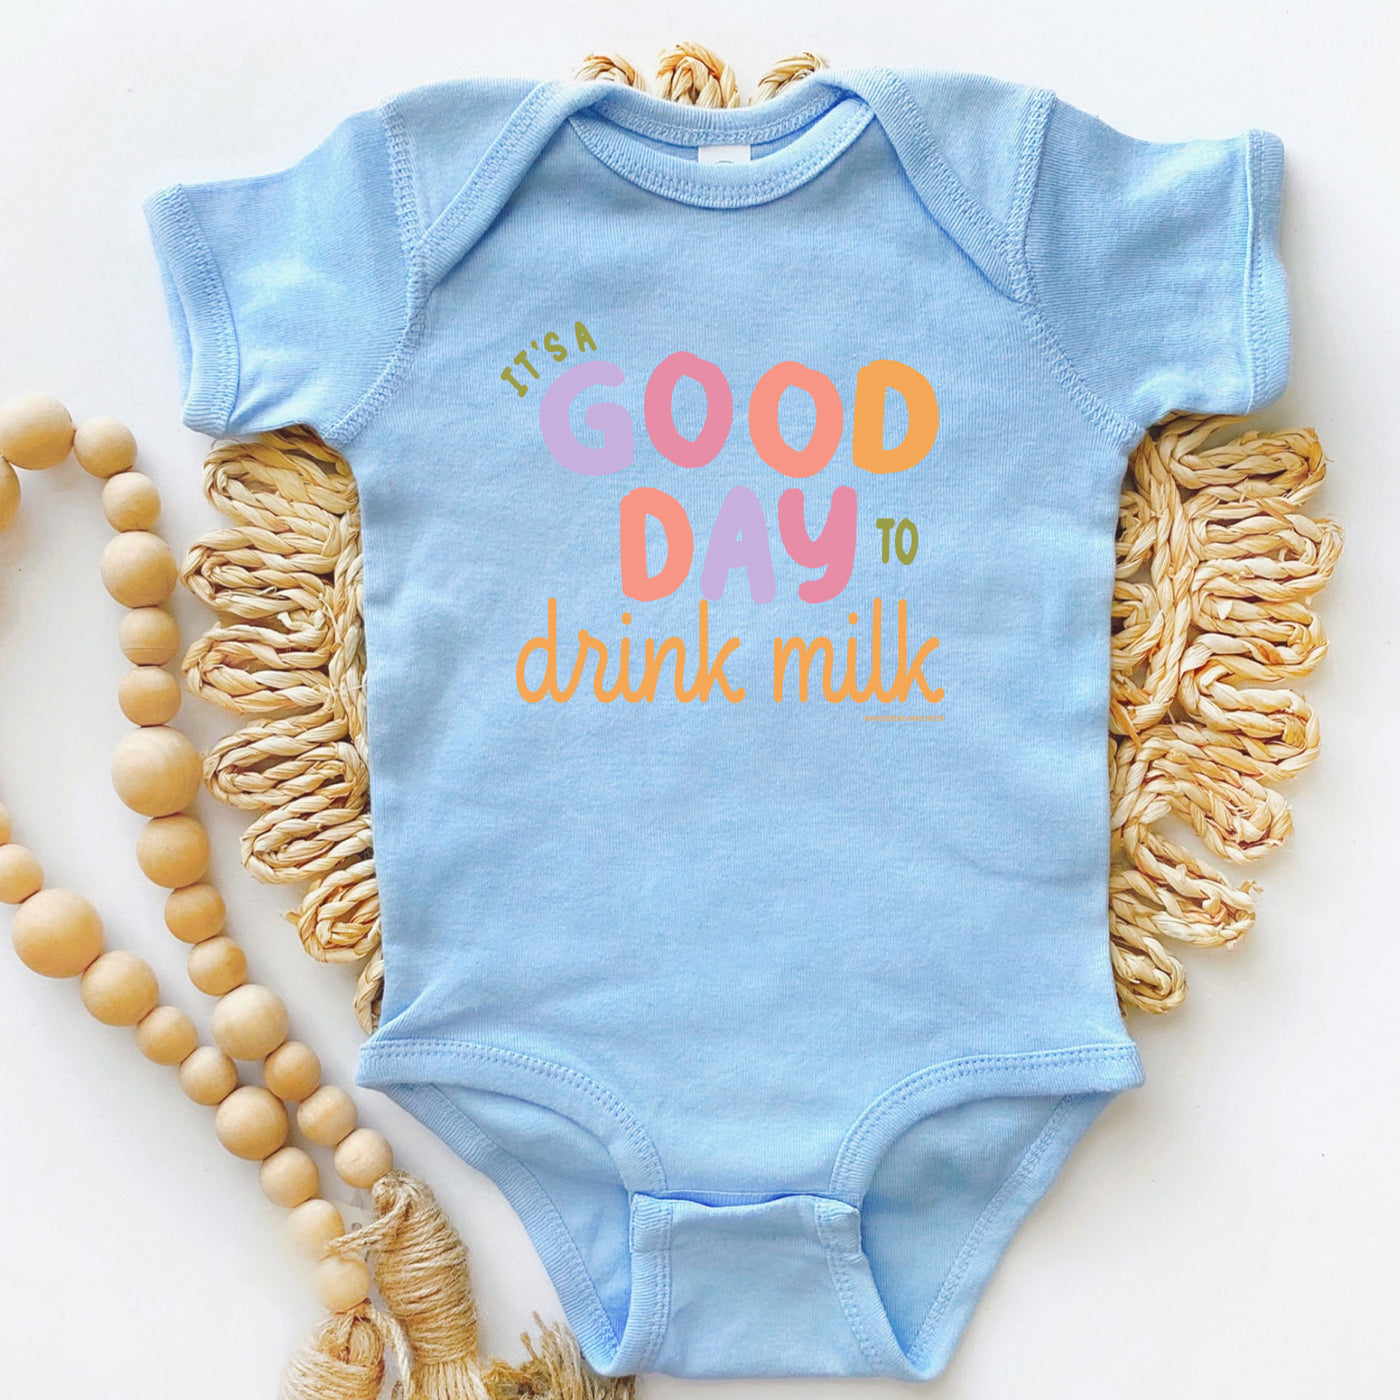 It's A Good Day To Be Drink Milk One Piece/T-Shirt (Newborn - Youth XL) - Multiple Colors!